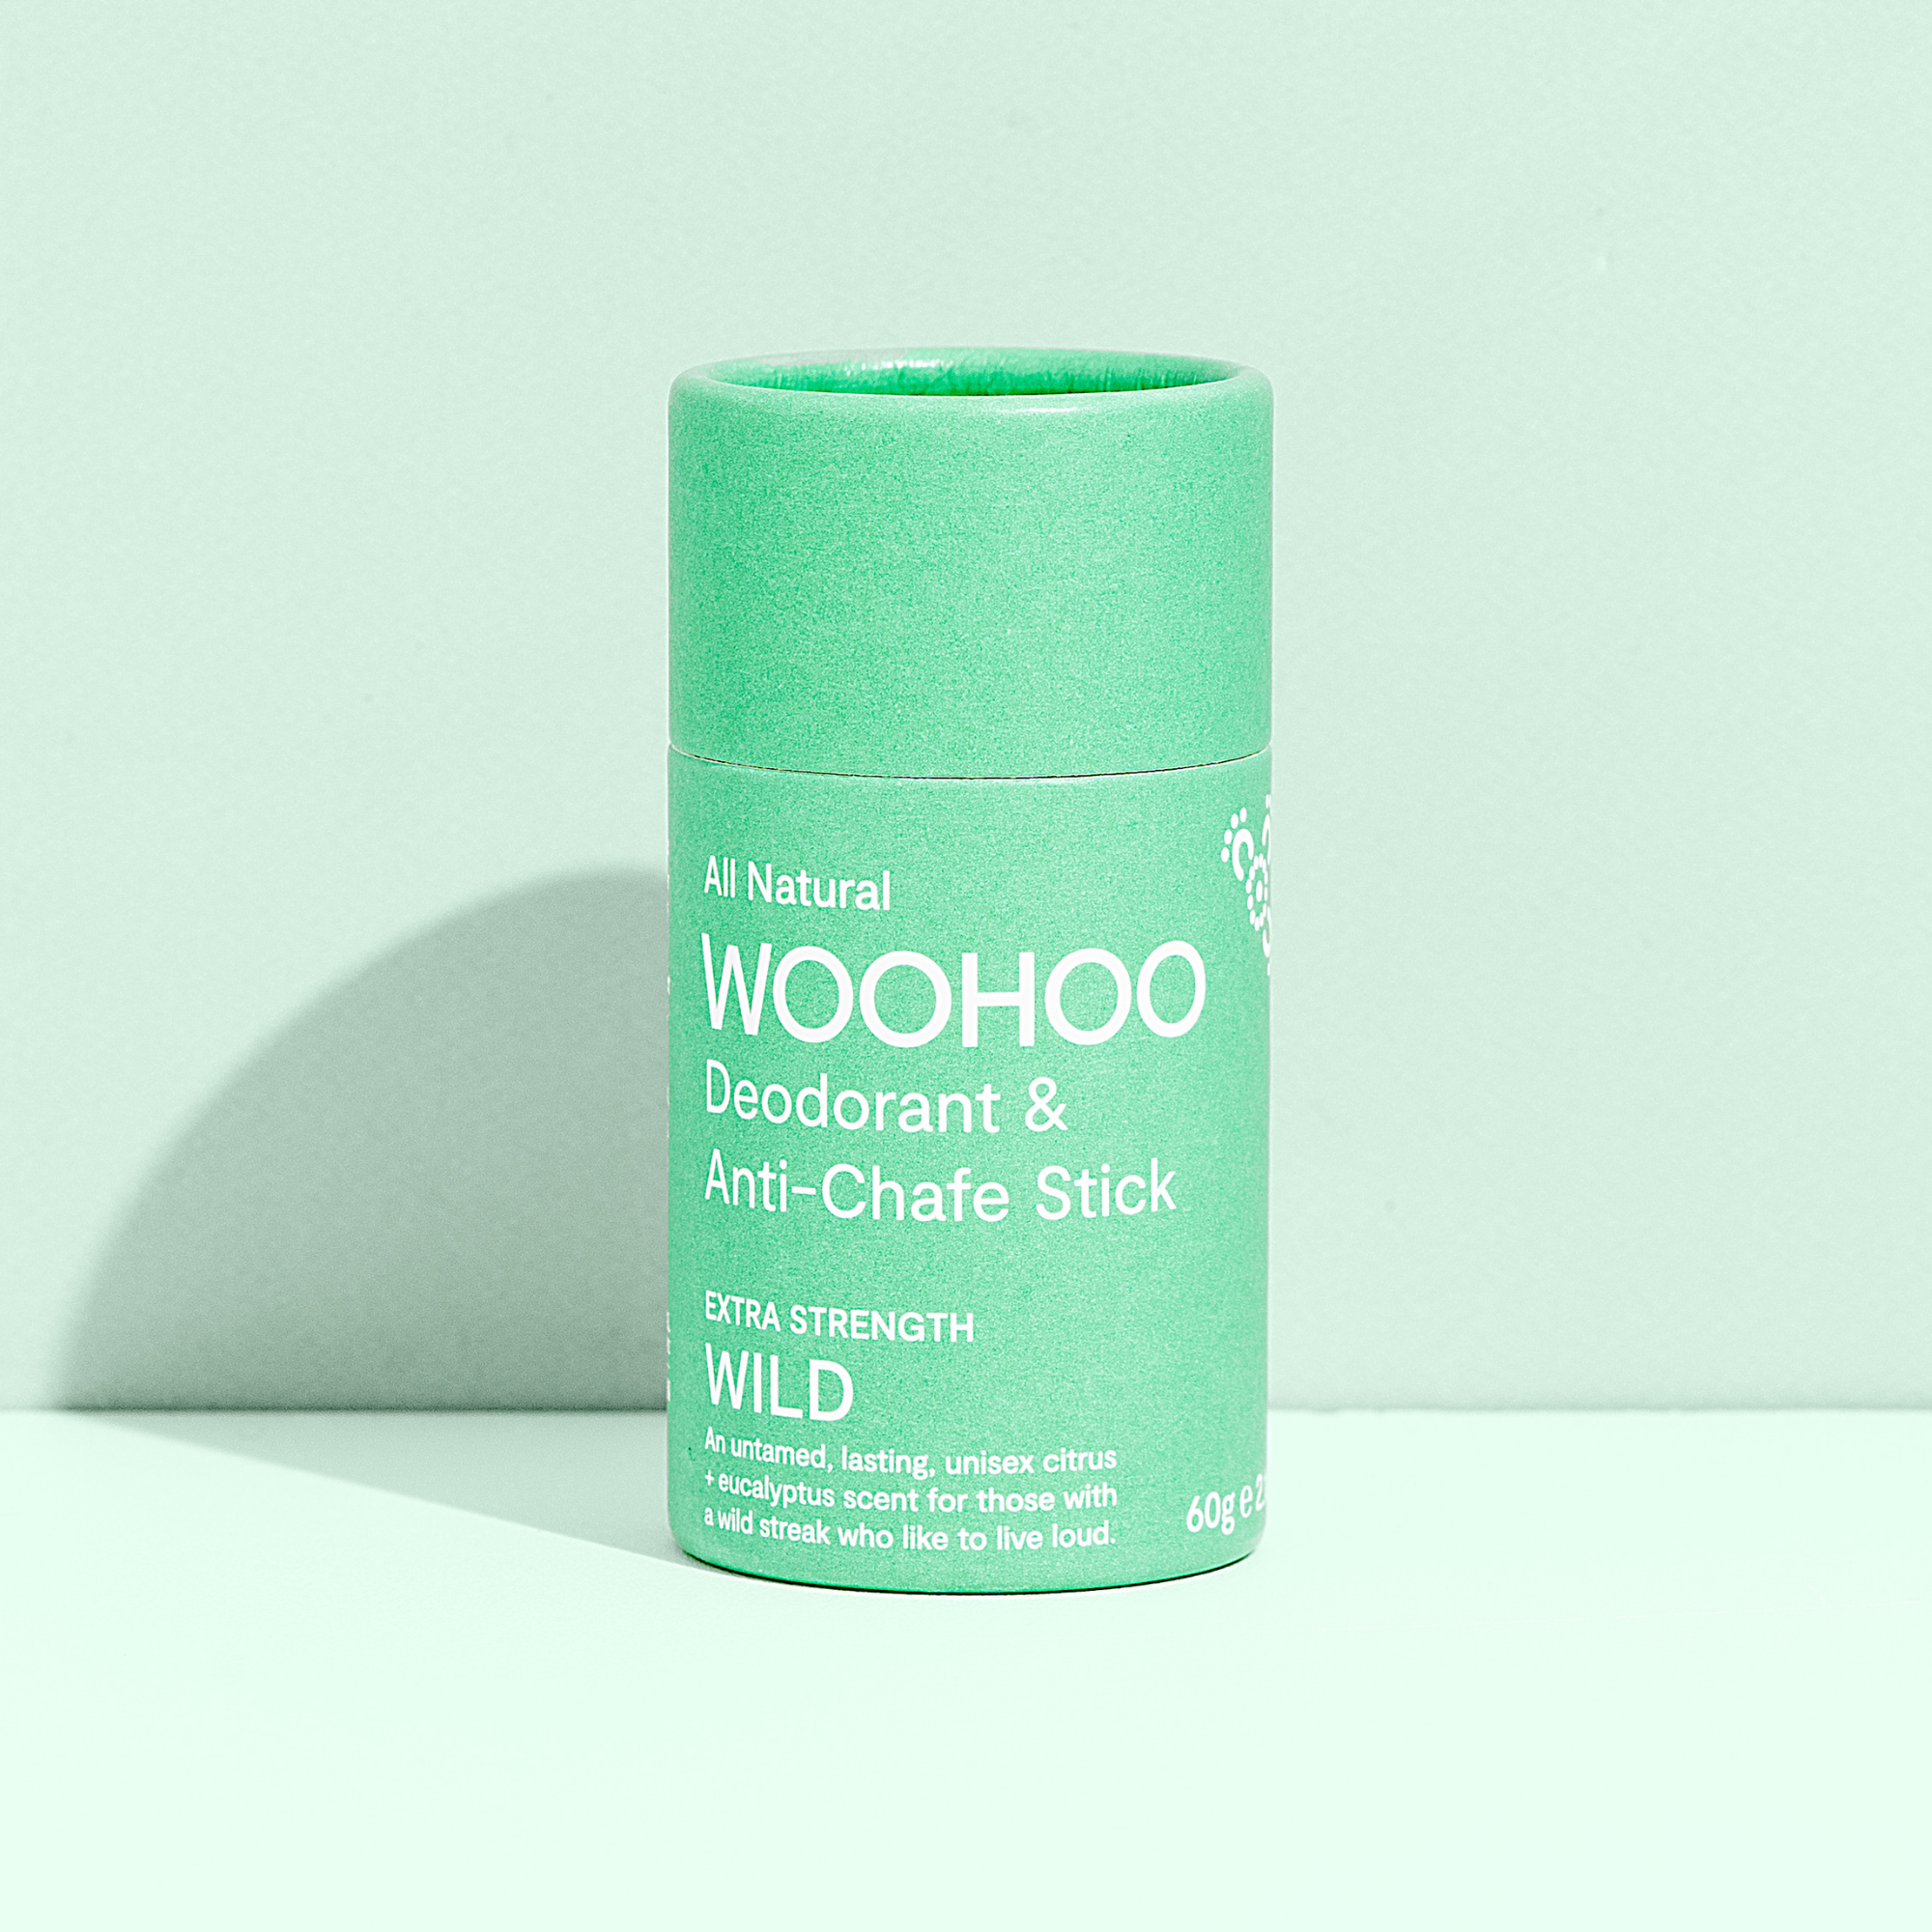 woohoo wild all natural deodorant and anti-chafe stick extra strength 60 grams front of packaging tube